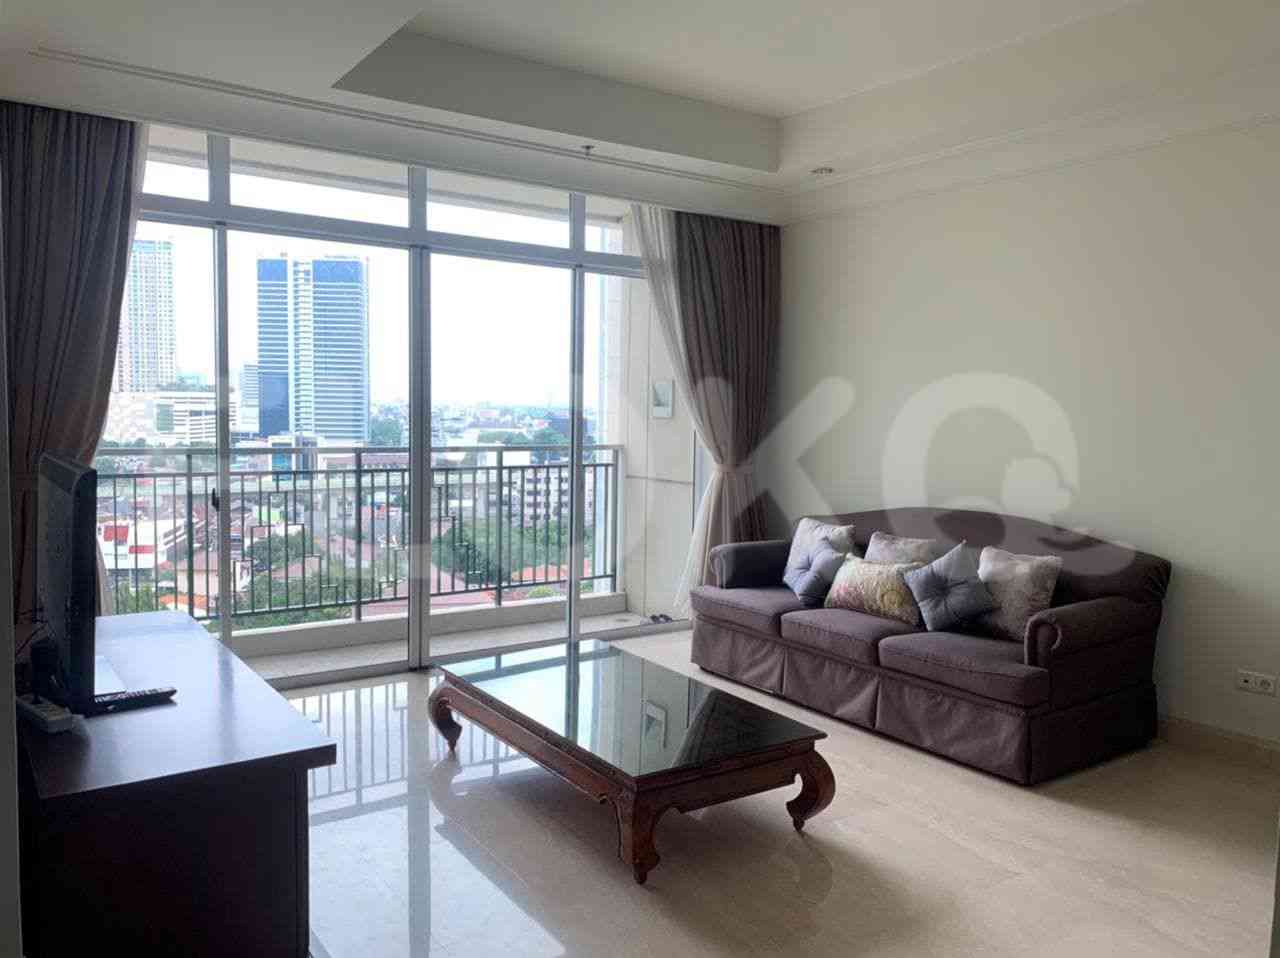 2 Bedroom on 15th Floor for Rent in Pakubuwono View - fga35b 1